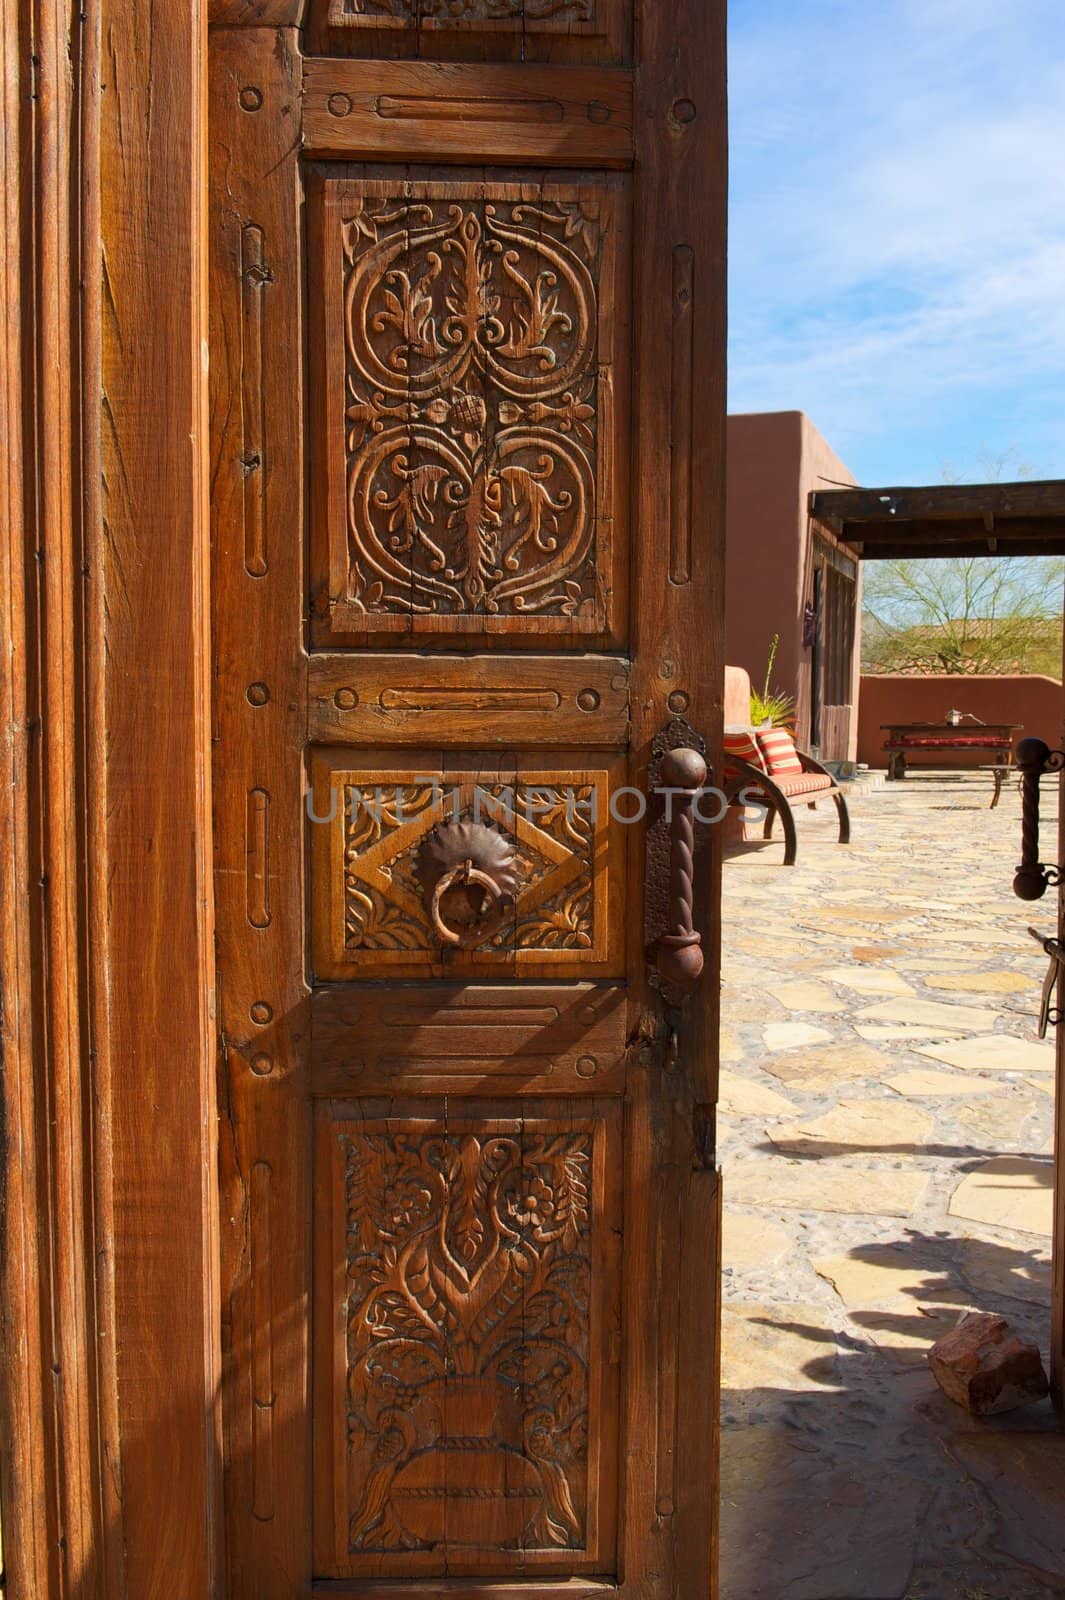 A wooden, ornate, opened door with metal knocker leads to a inner courtyard with stone and seating